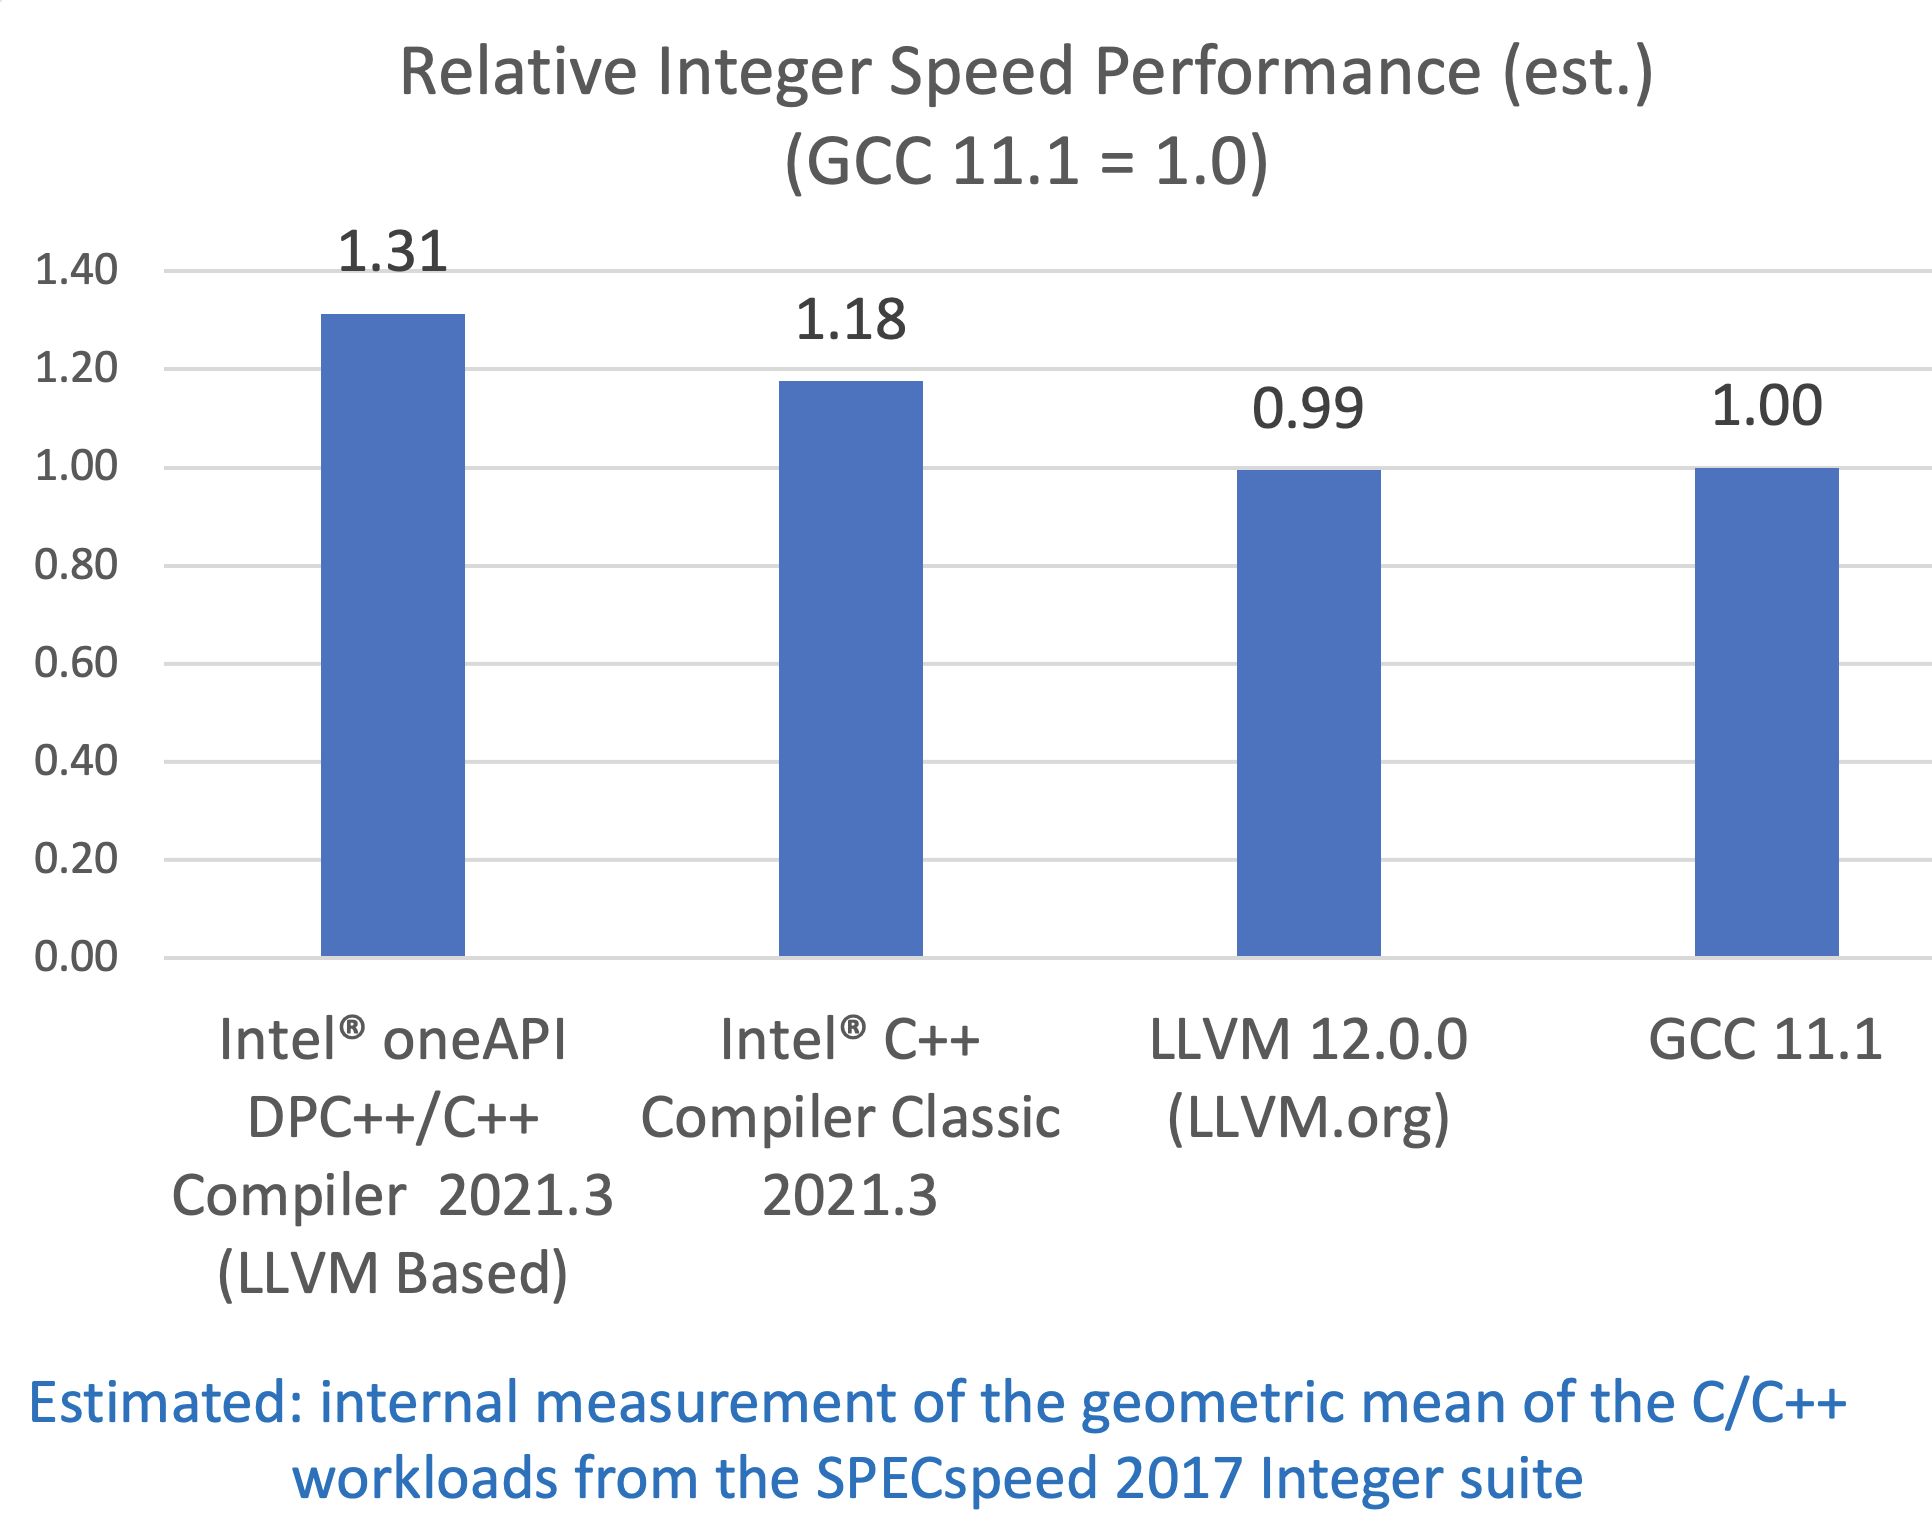 SPECspeed 2017 INT (Estimated) Performance advantage relative to other compilers on Intel® Xeon Platinum 8380 Processor